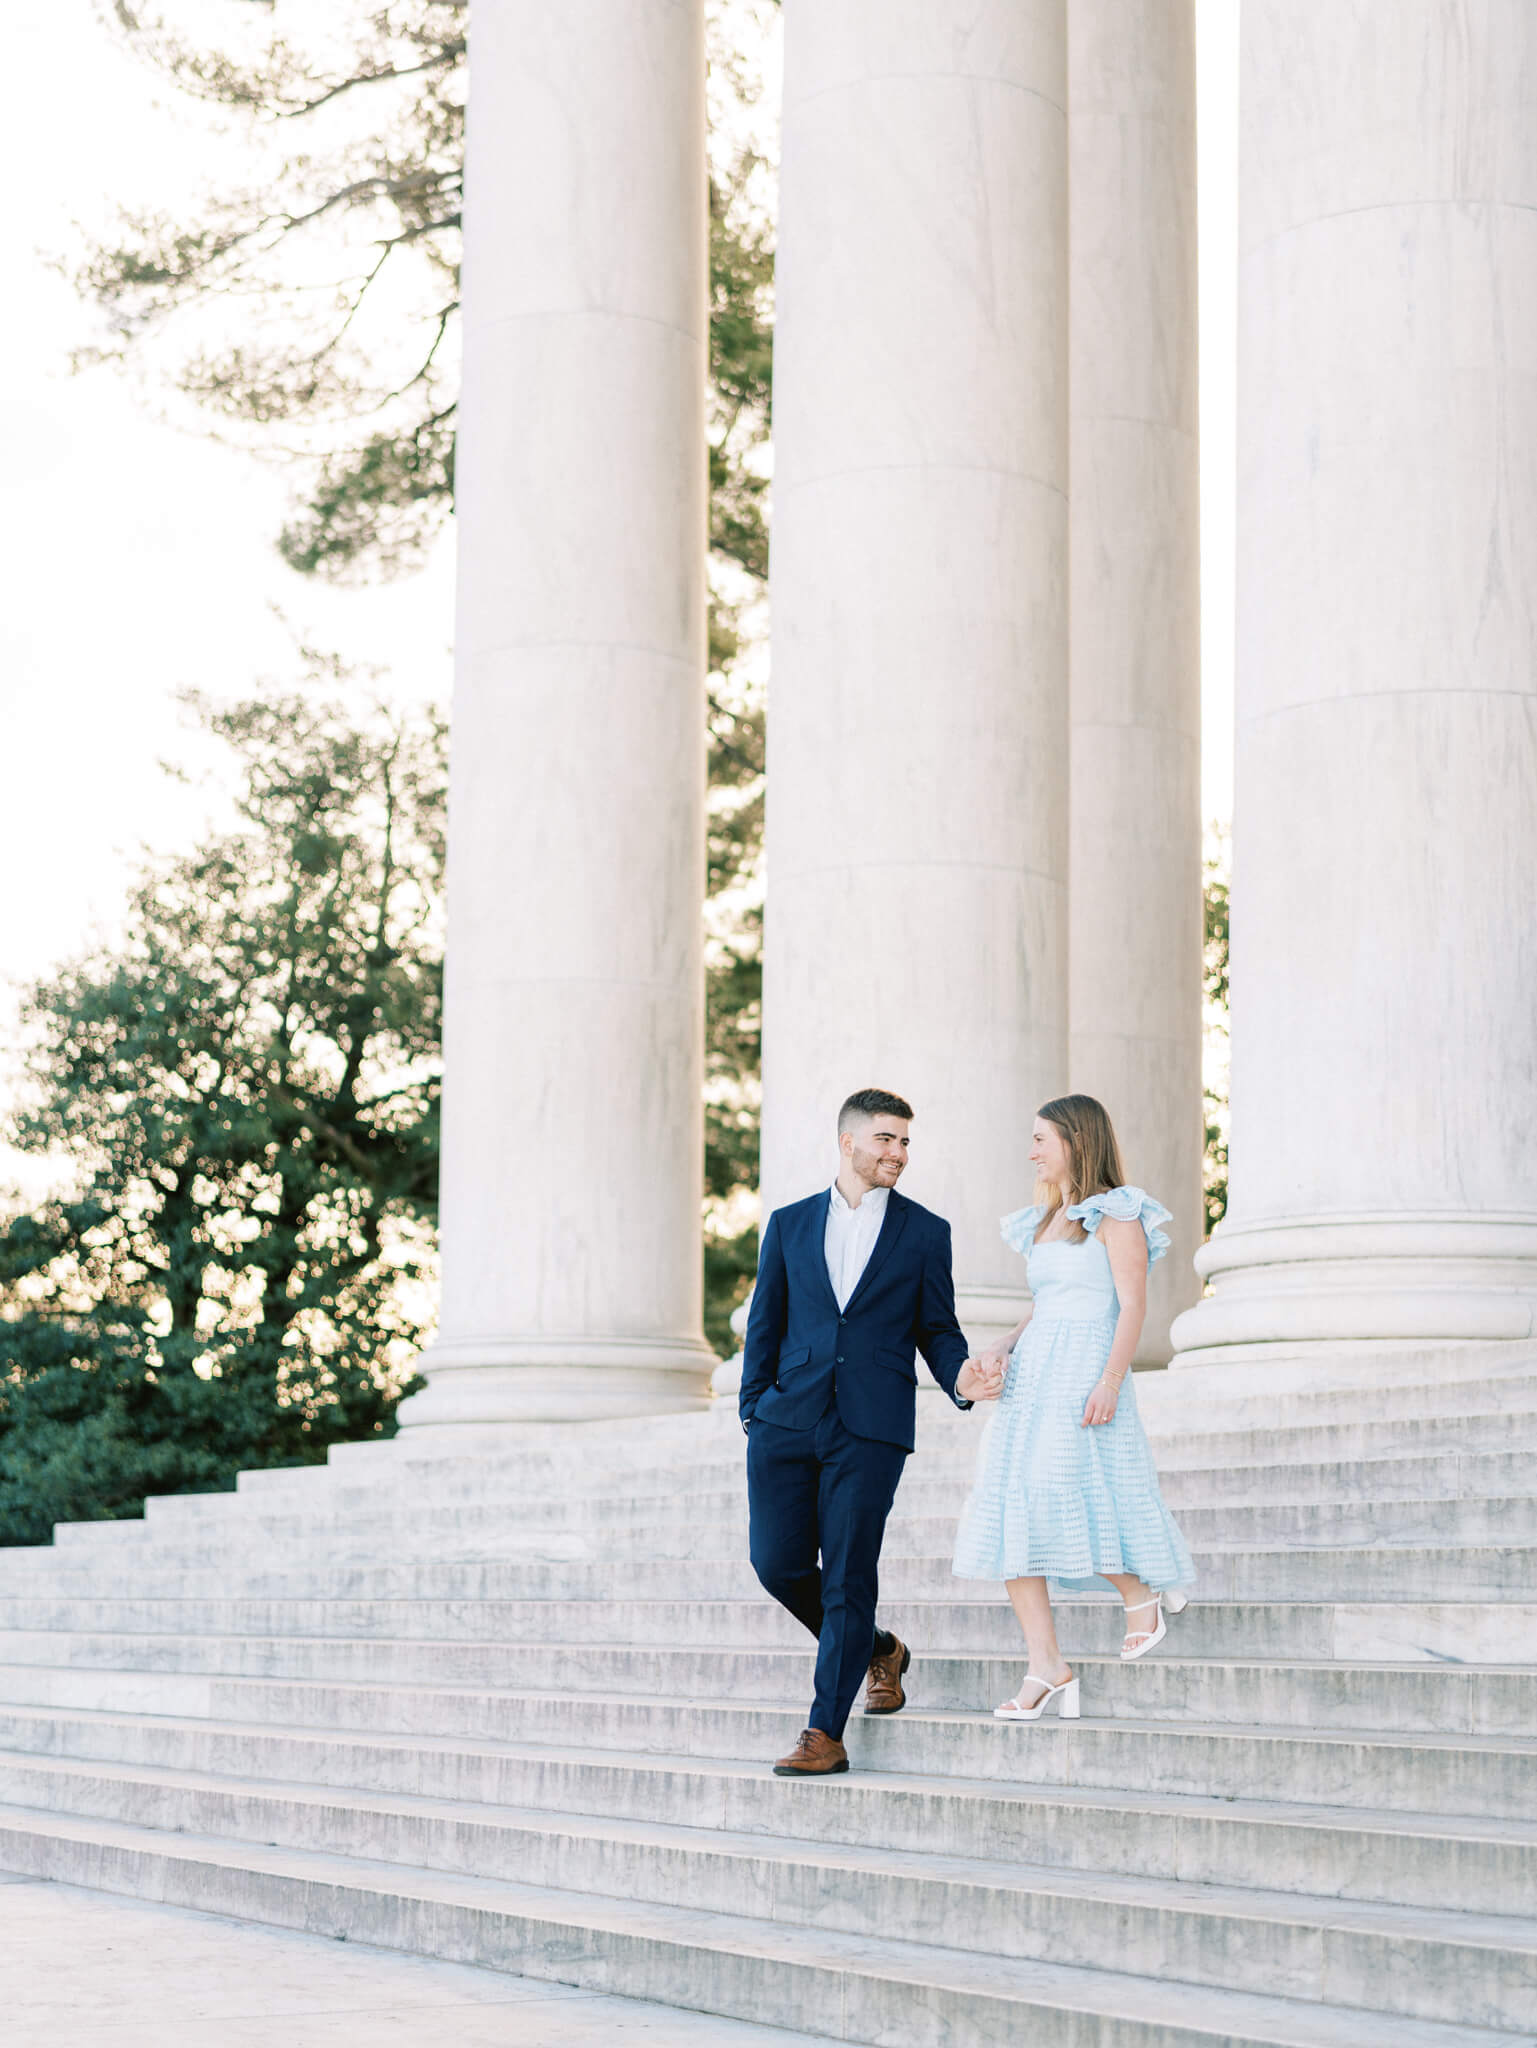 A man in a navy blue suit and a woman in a light blue dress walking down the steps of the Jefferson Memorial while looking at each other with columns in the background.